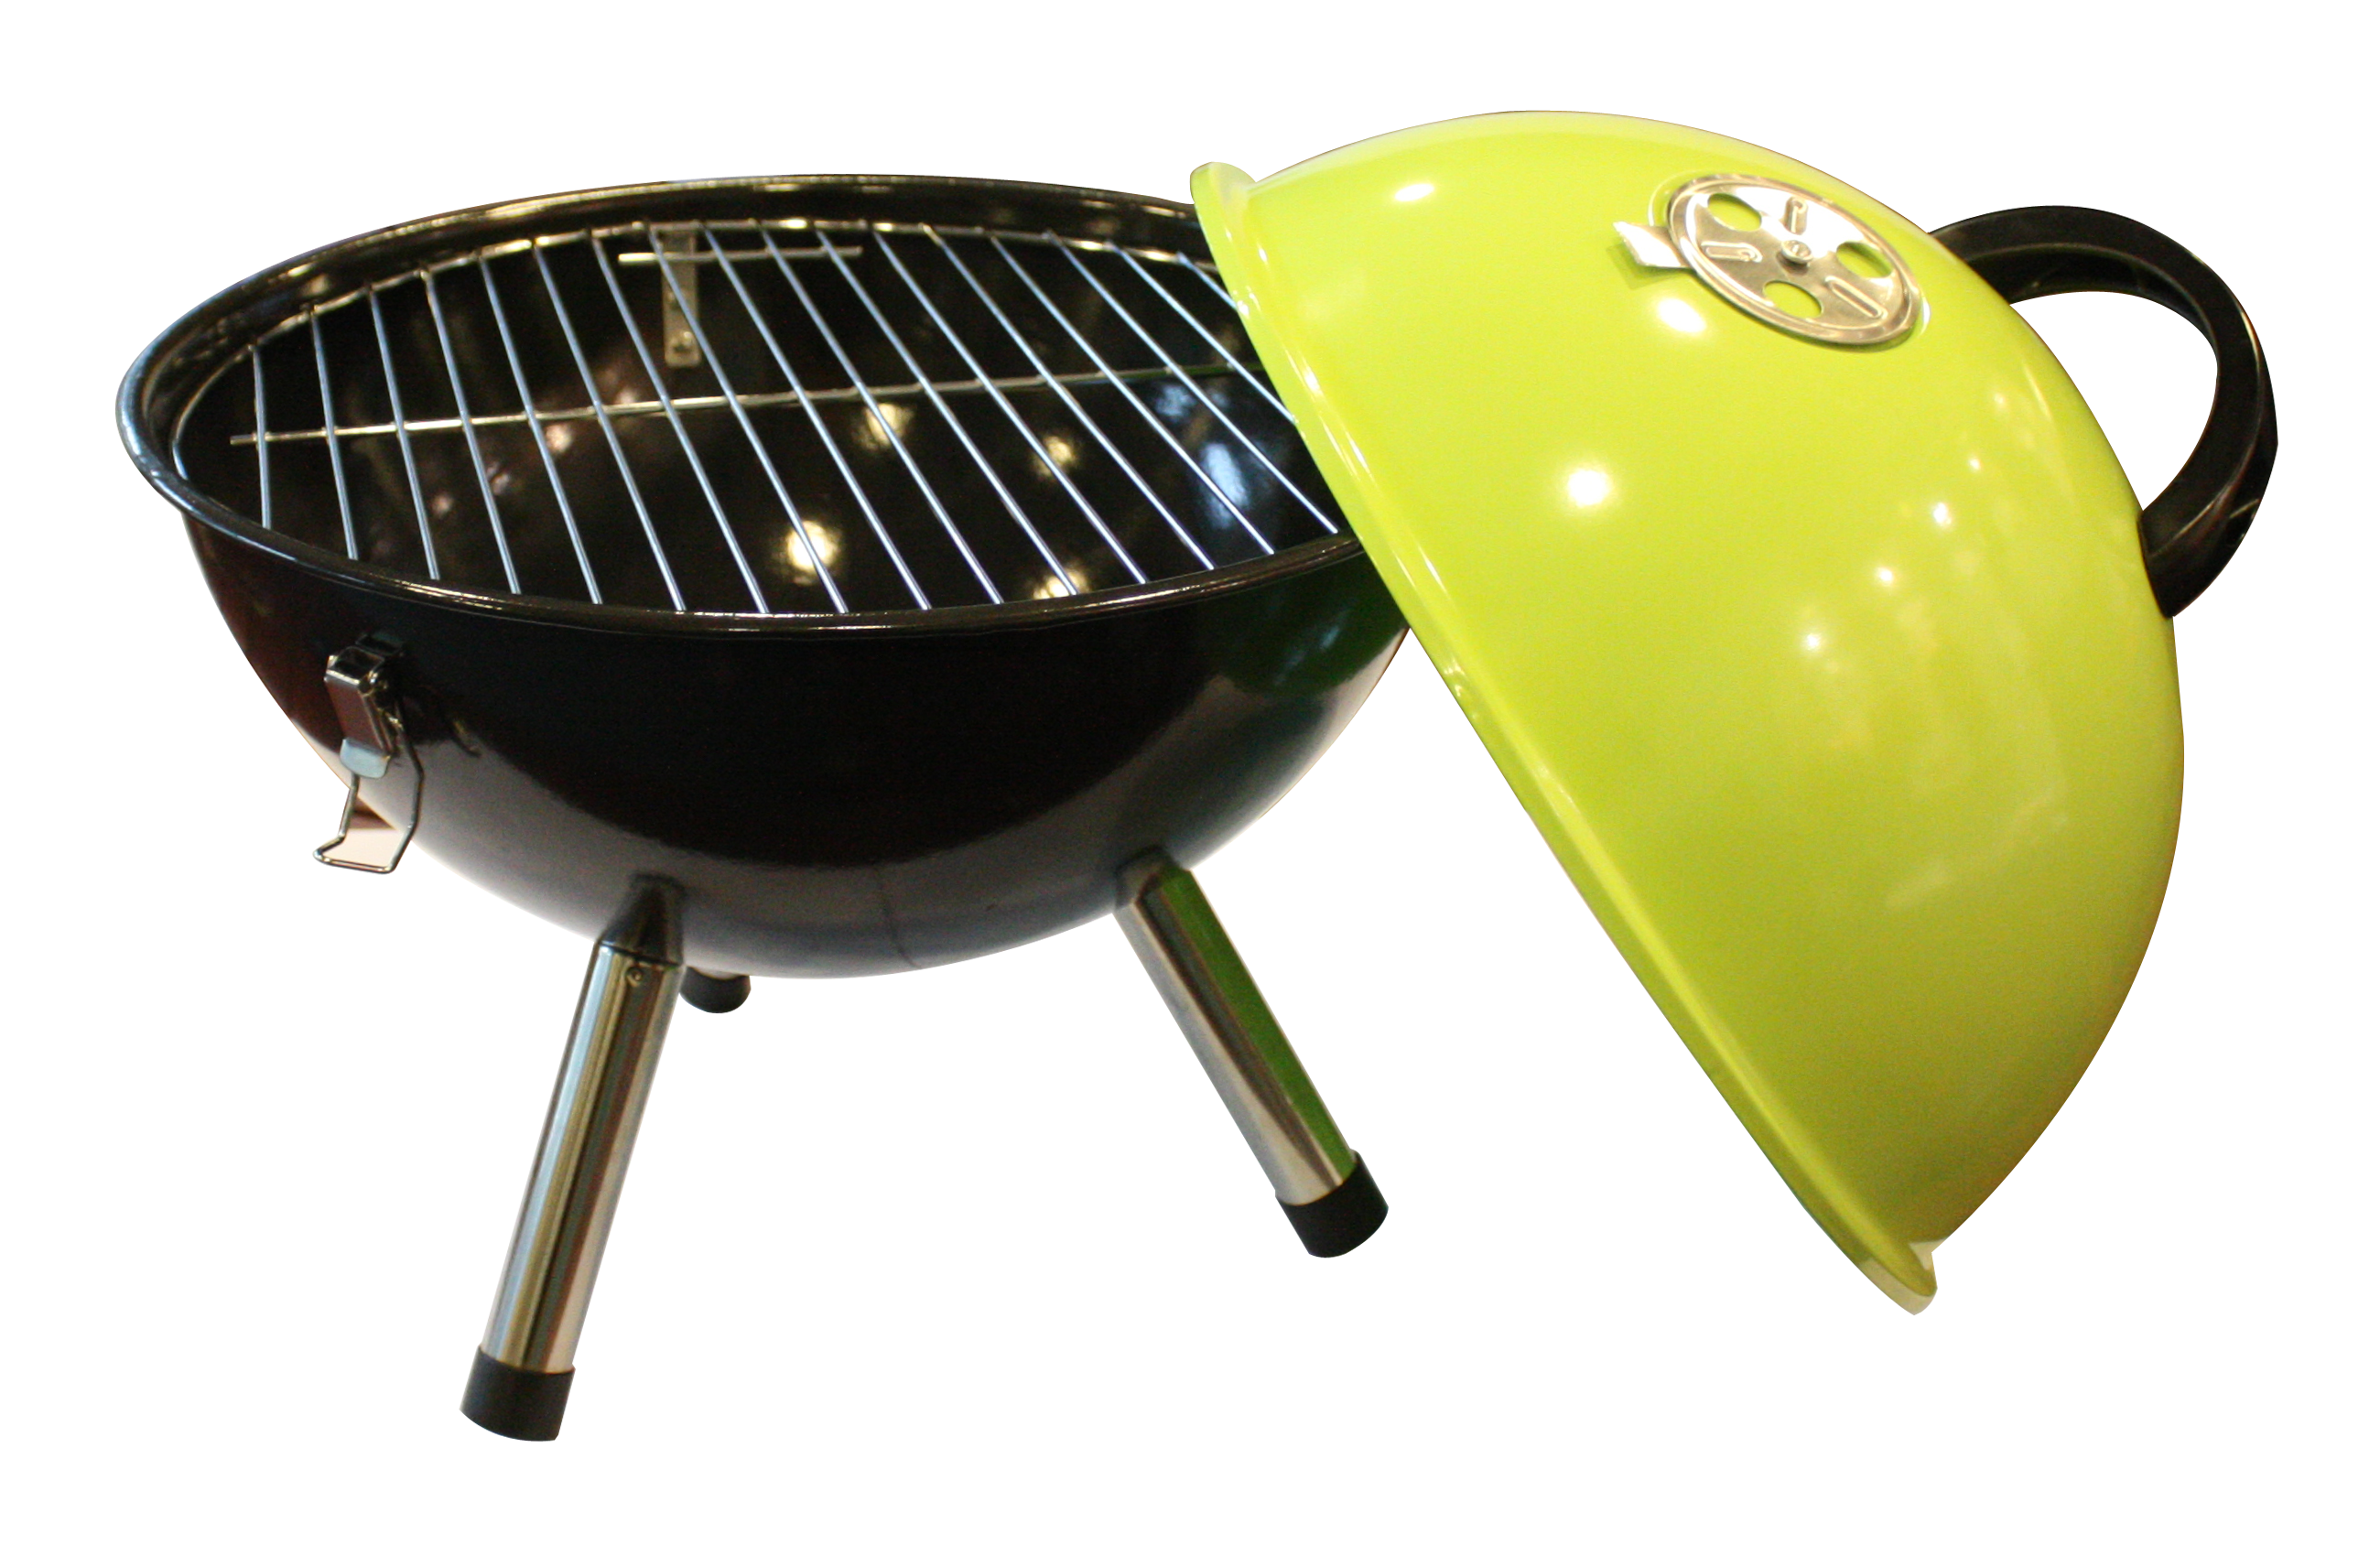 Grilling Clipart Charcoal Grill Grilling Charcoal Grill Transparent